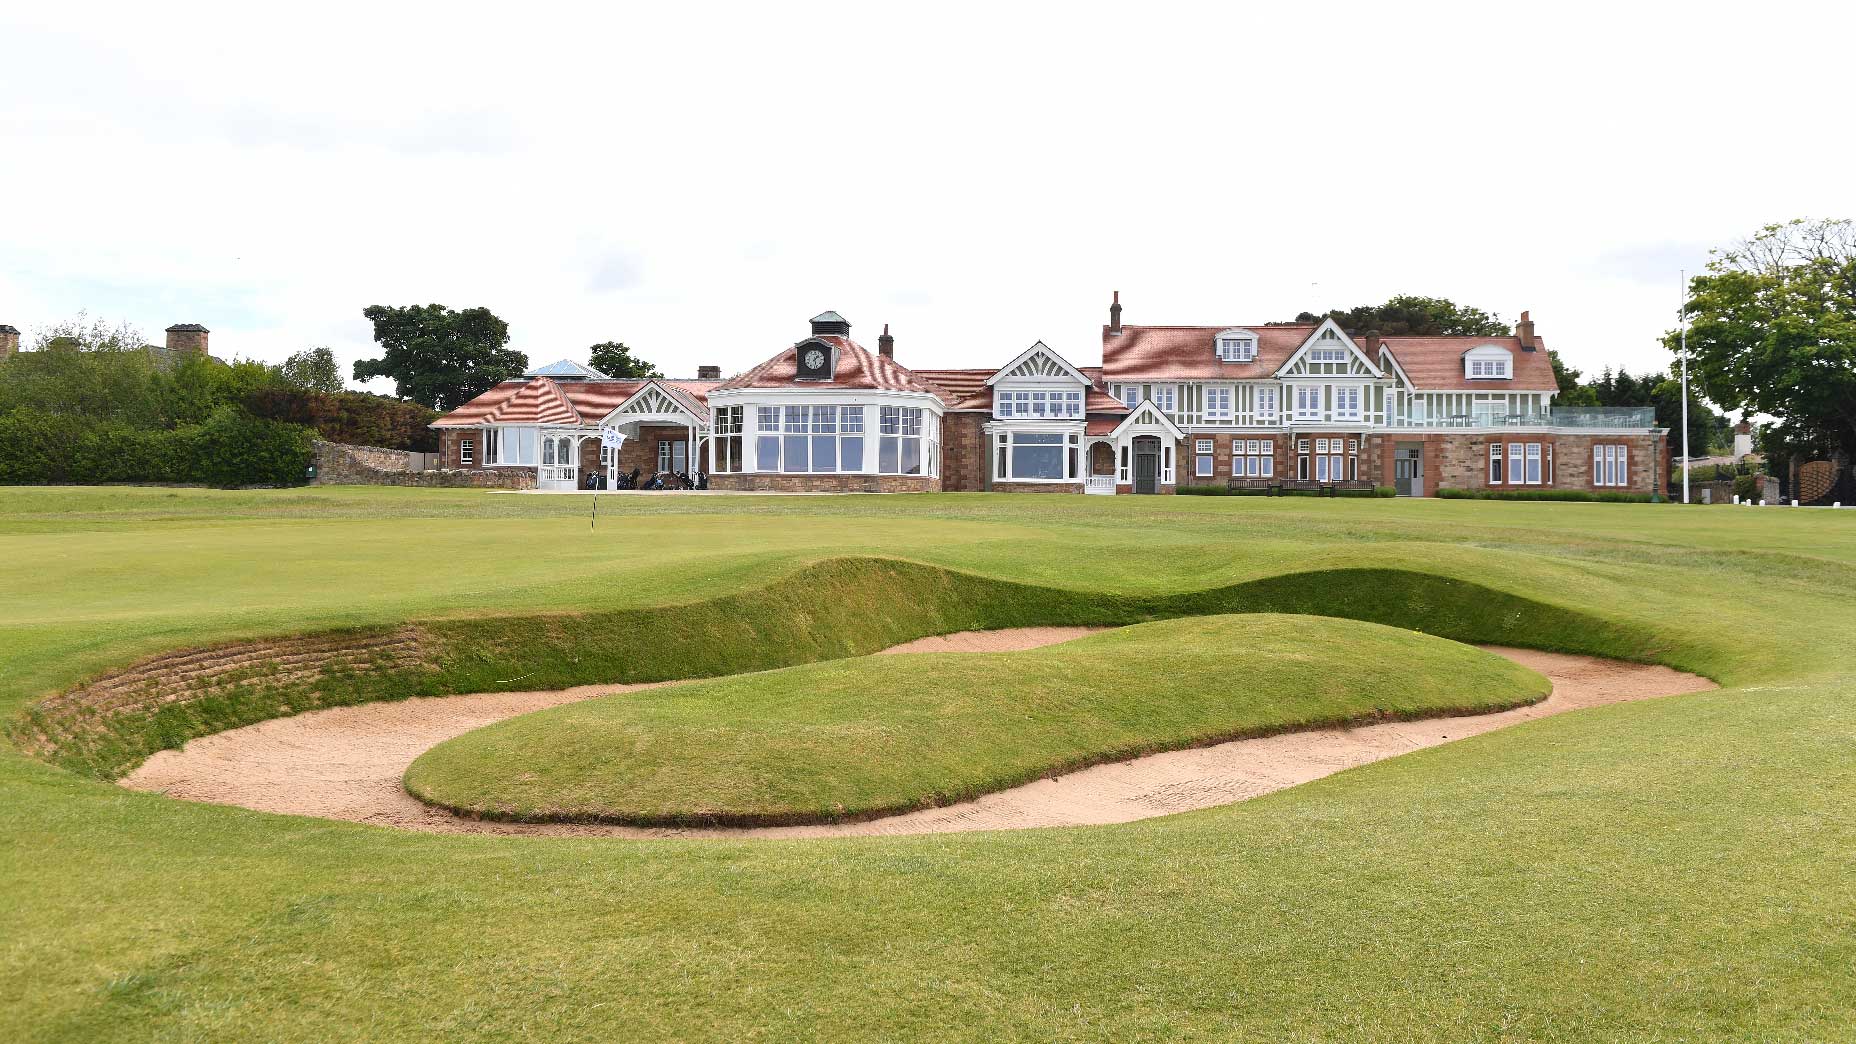 The 18th hole and clubhouse at Muirfield in Scotland